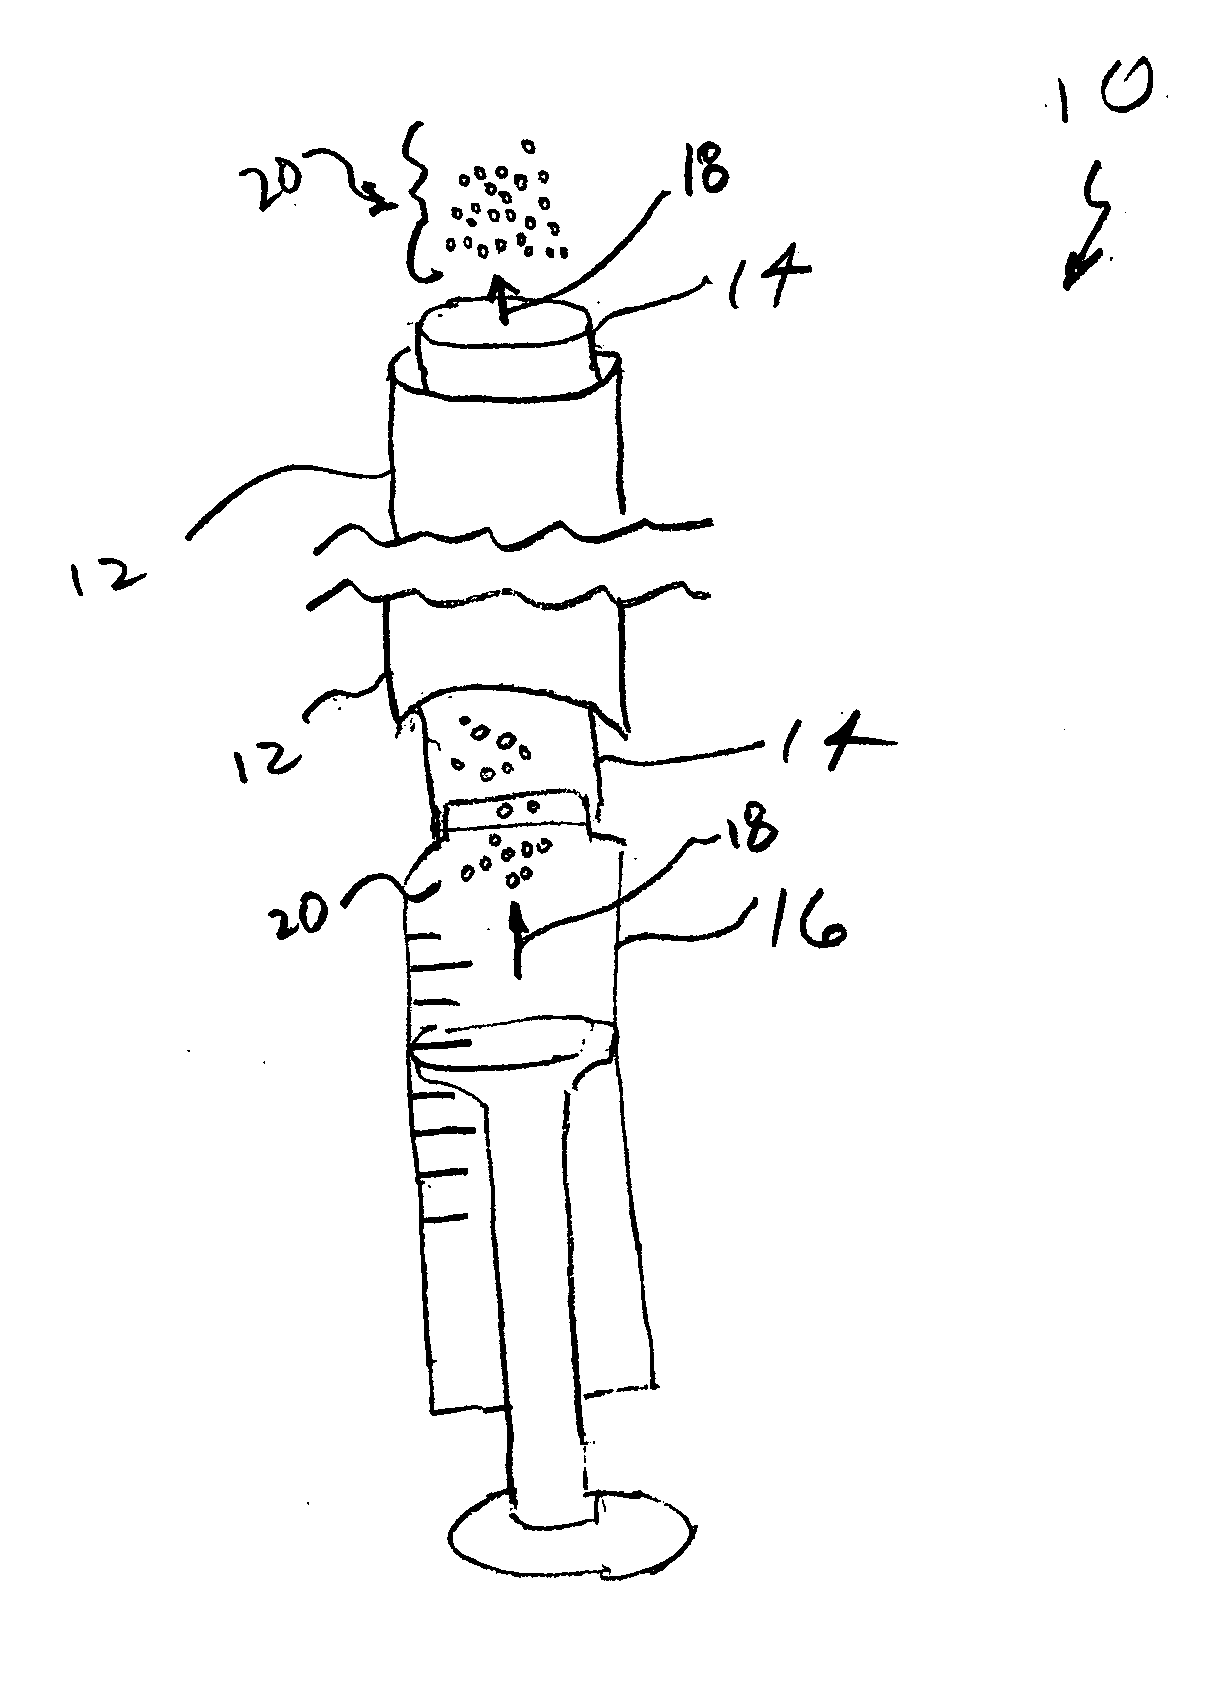 Radio-opaque hemostatic agents and devices and methods for the delivery thereof